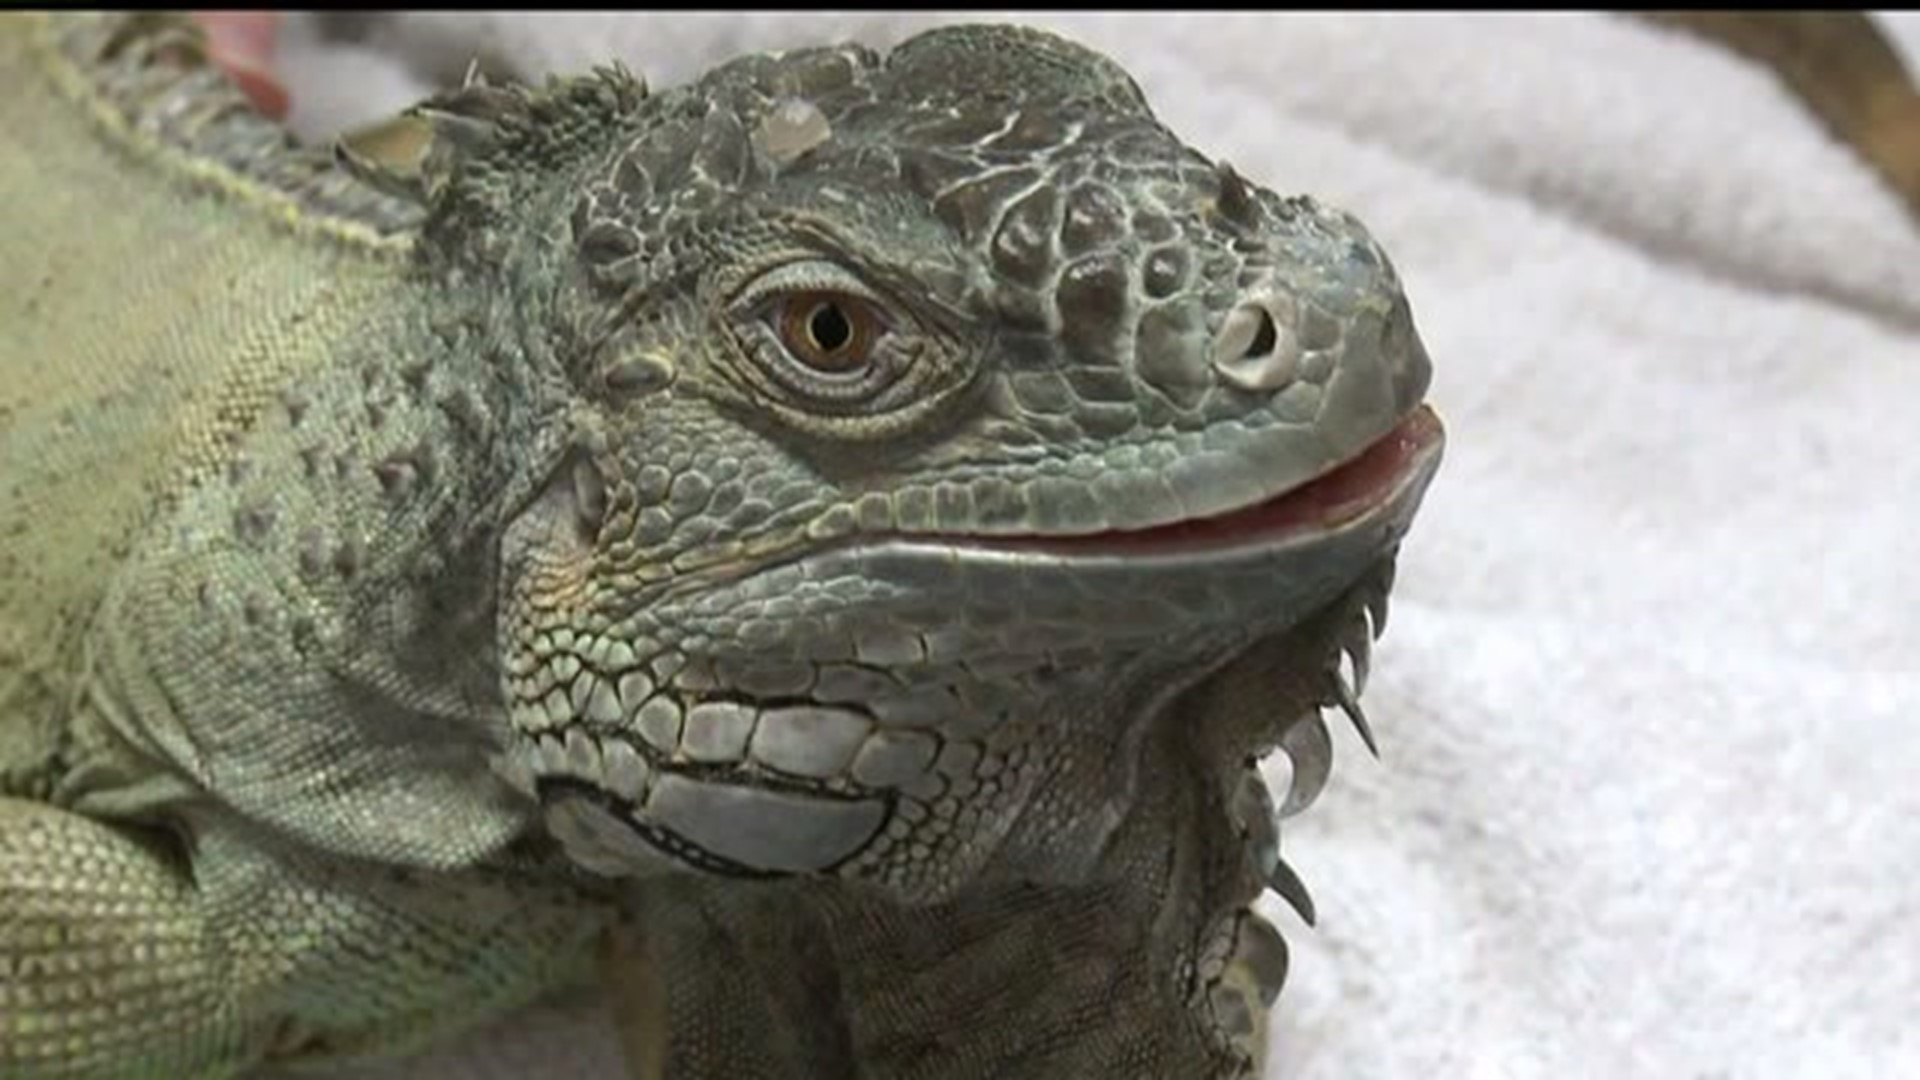 Pet health advice for your reptile